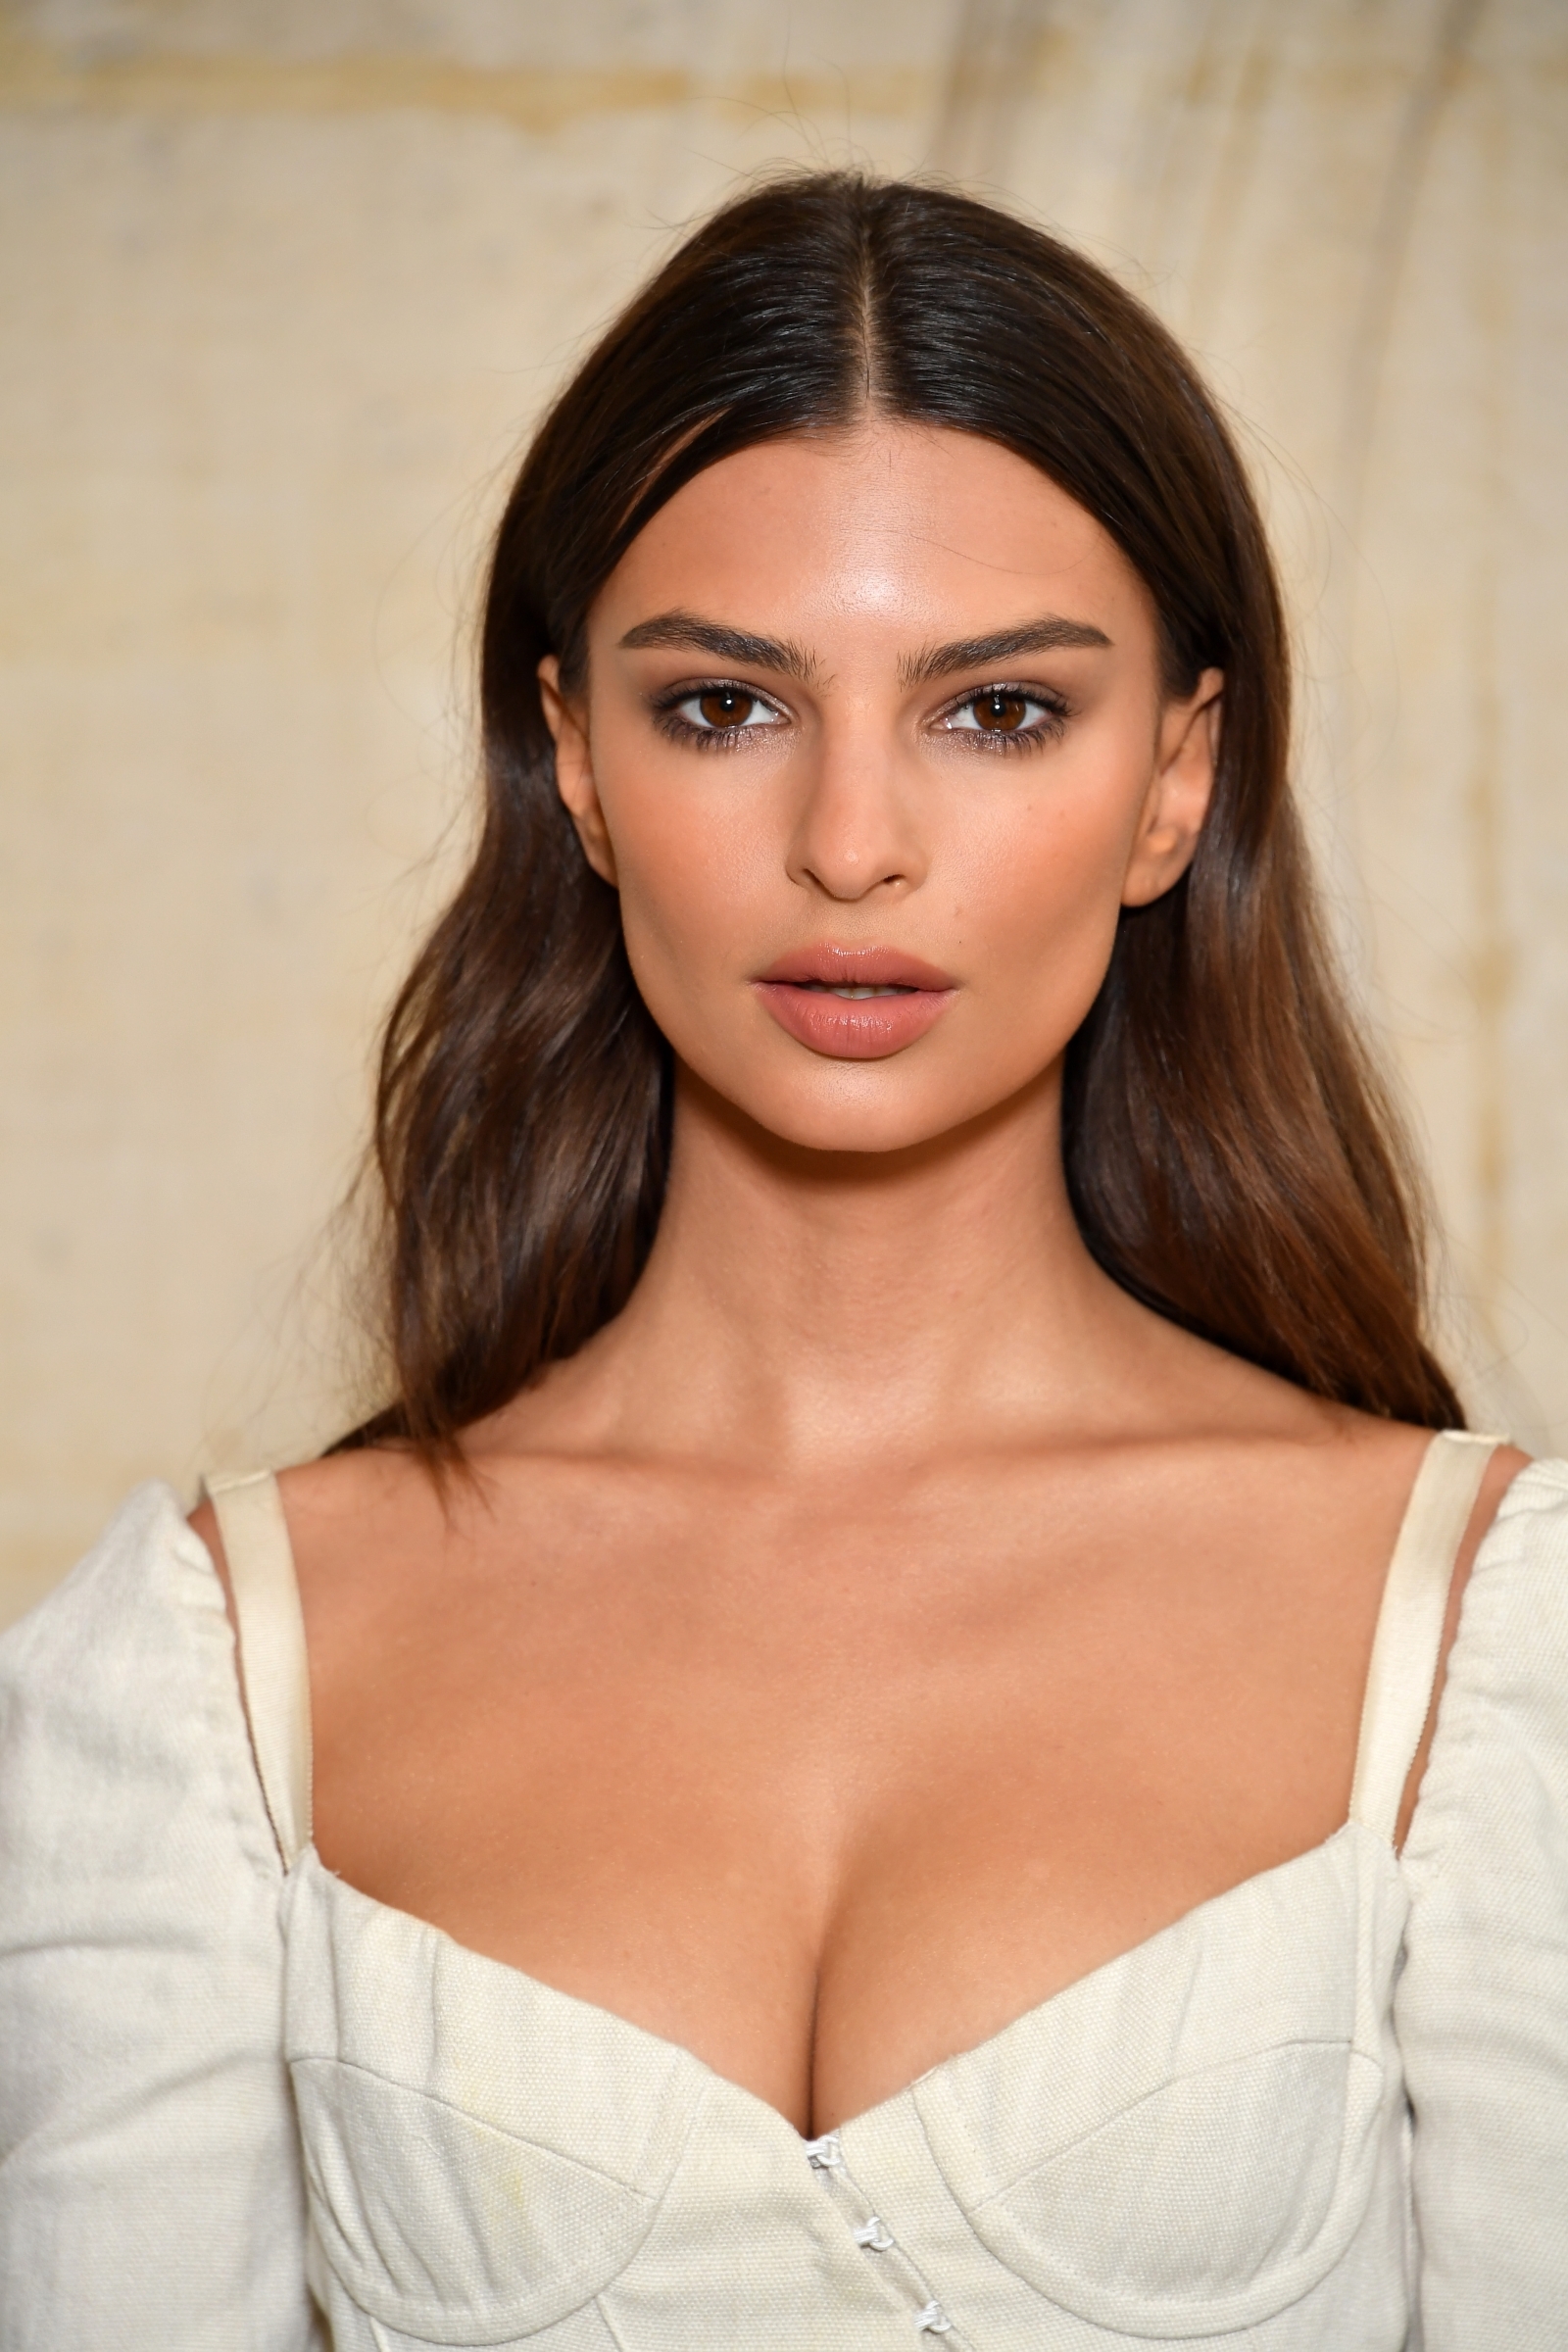 Emily Ratajkowski Leaves Little To The Imagination With Stunning New Photo Shoot Dream Come True